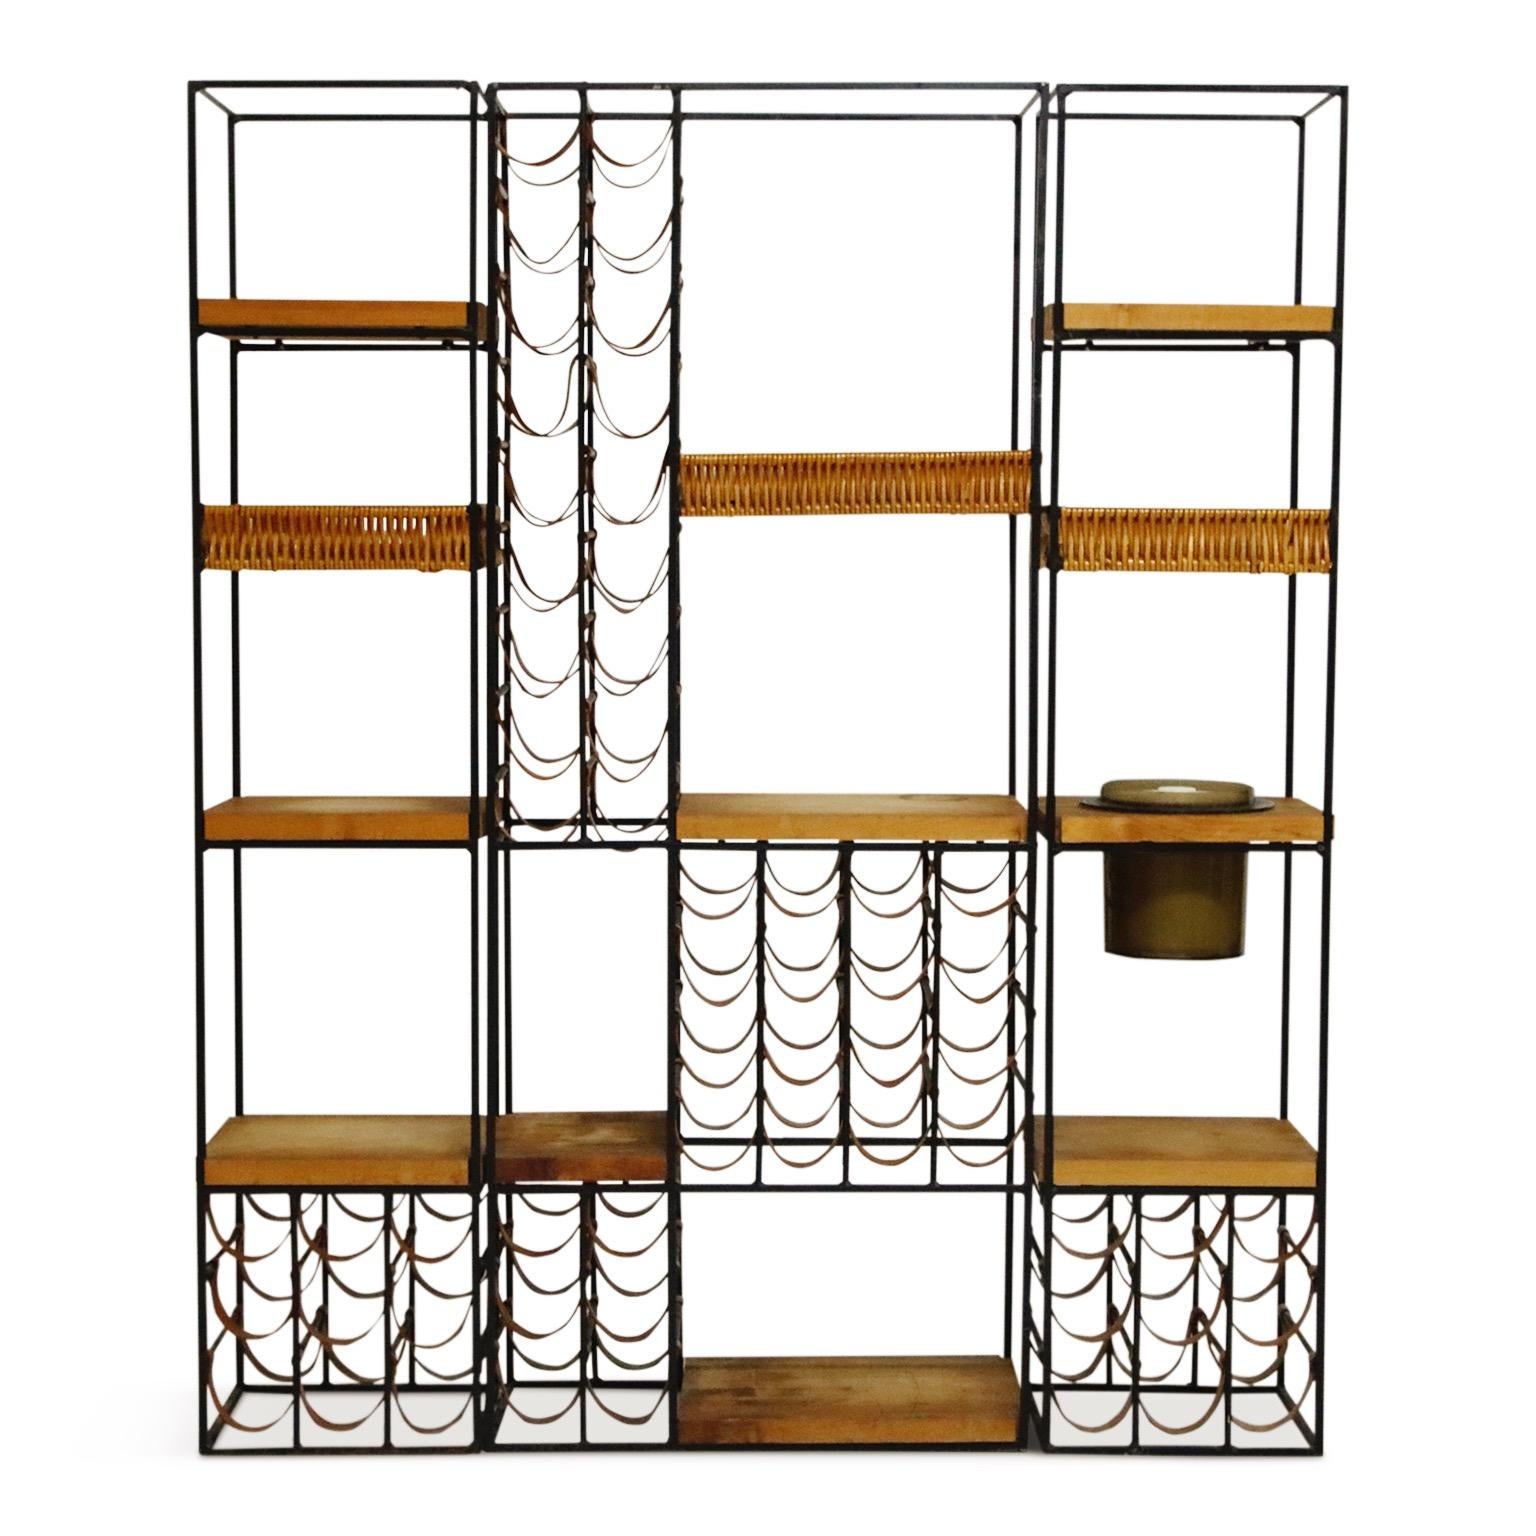 The ultimate entertaining piece, this Arthur Umanoff three (3) section wine rack system and room divider which also incorporates an artful array of fifty-eight (58) leather wine bottle holders, three (3) wicker baskets, eight (8) butcher block